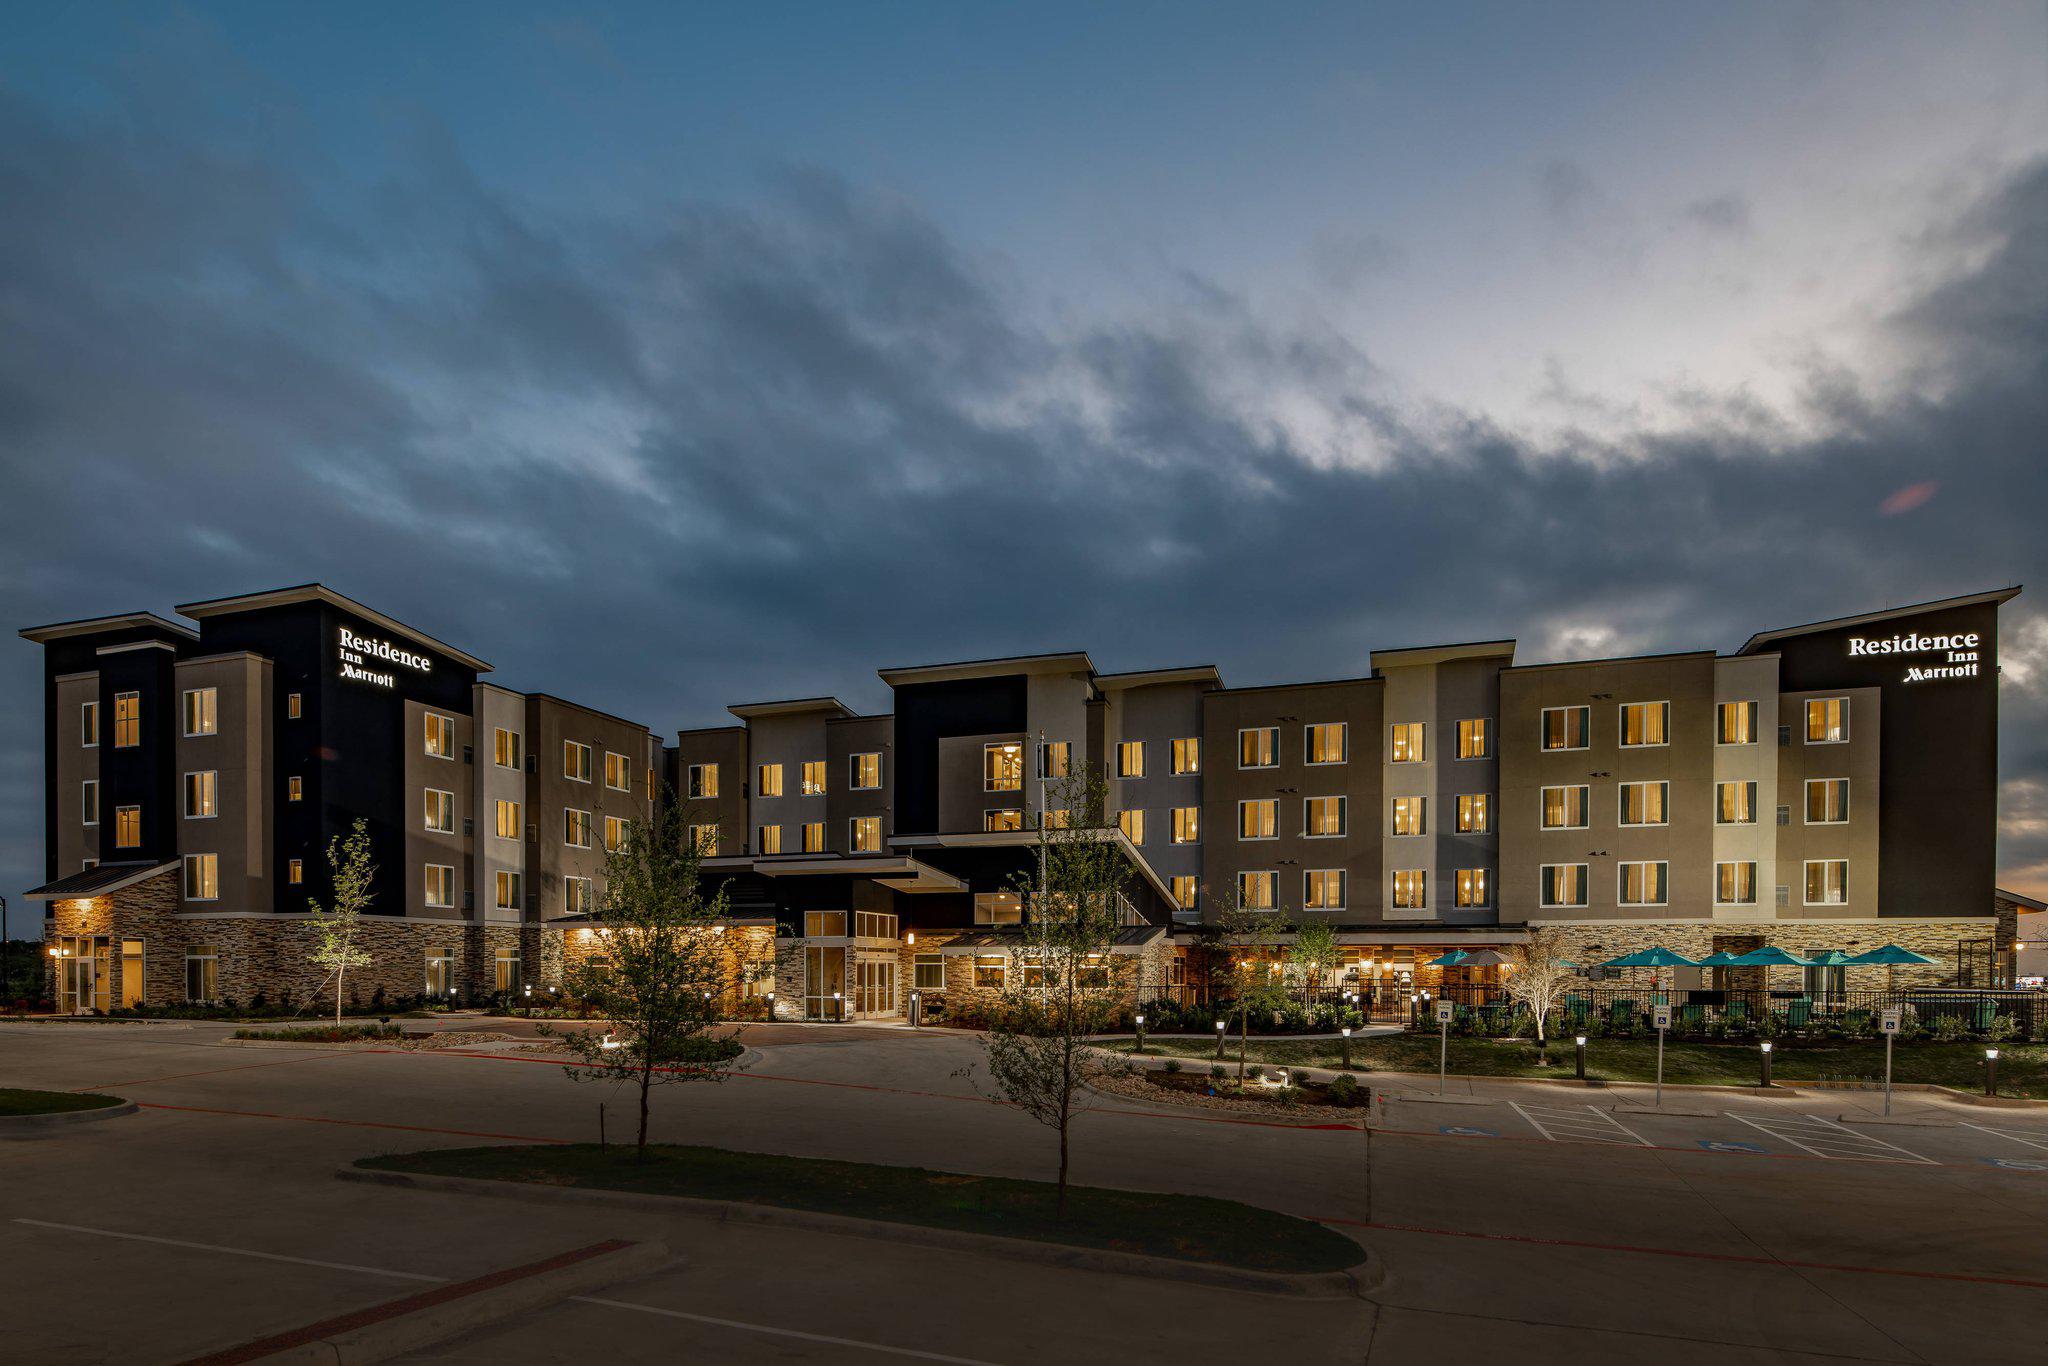 Residence Inn by Marriott Dallas at The Canyon